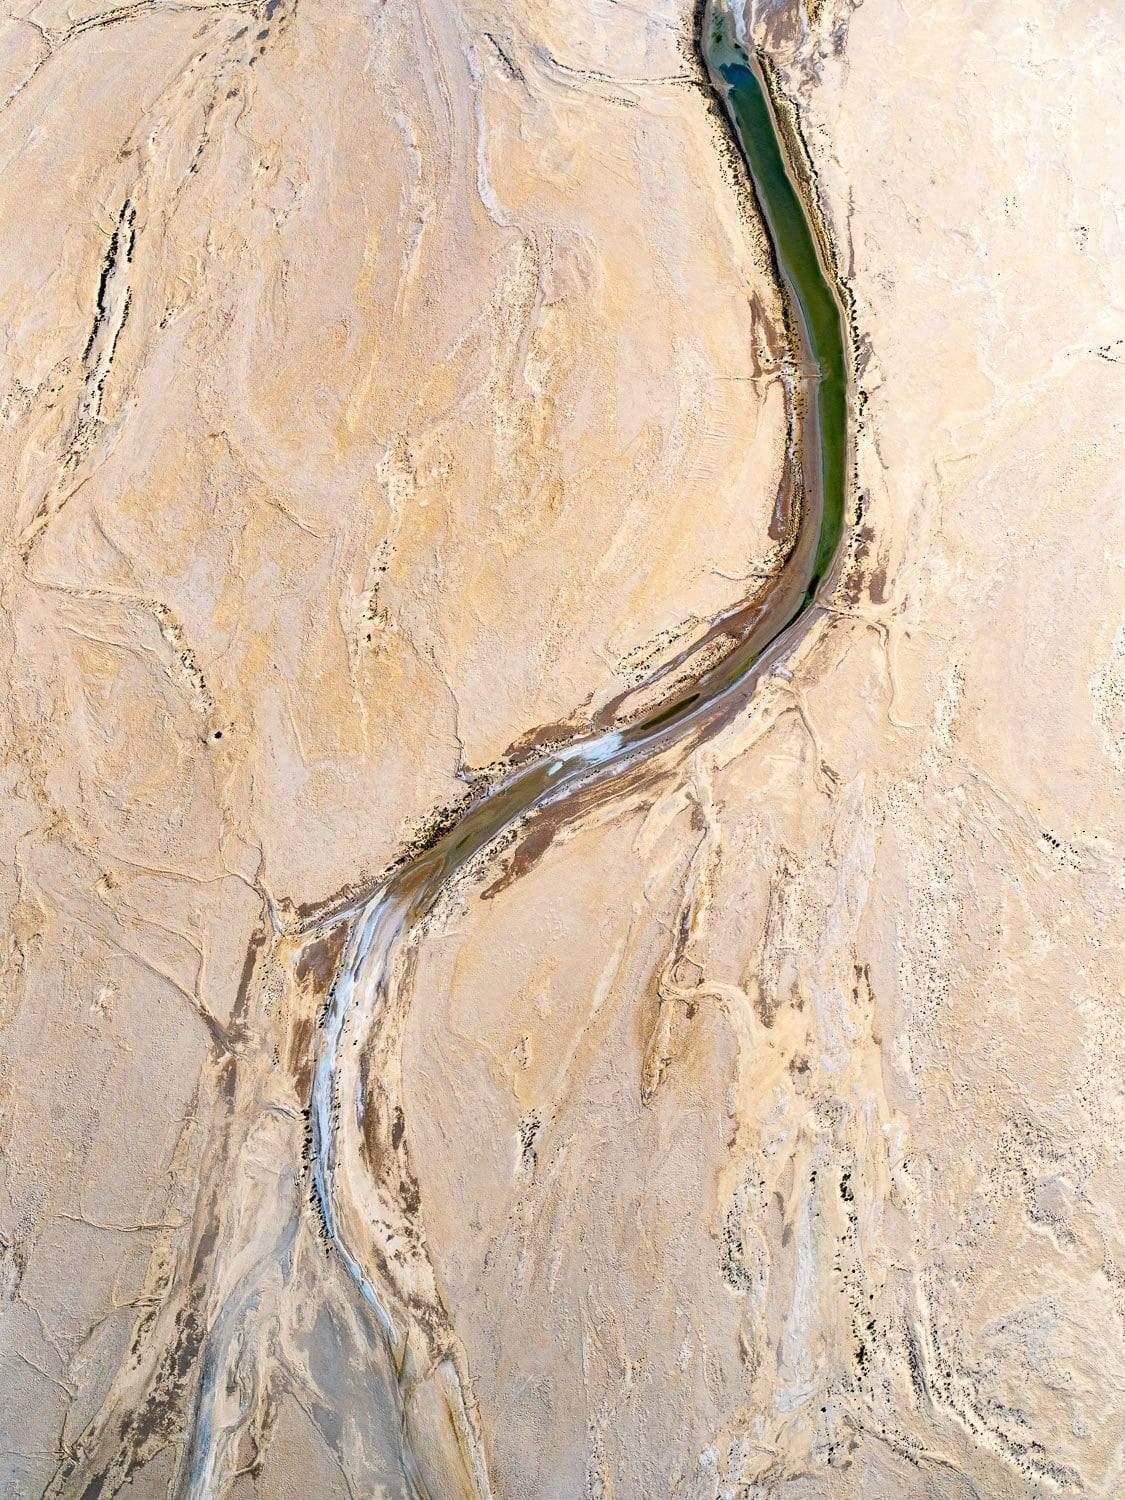 A curvy line over a solid stony surface, Running Dry